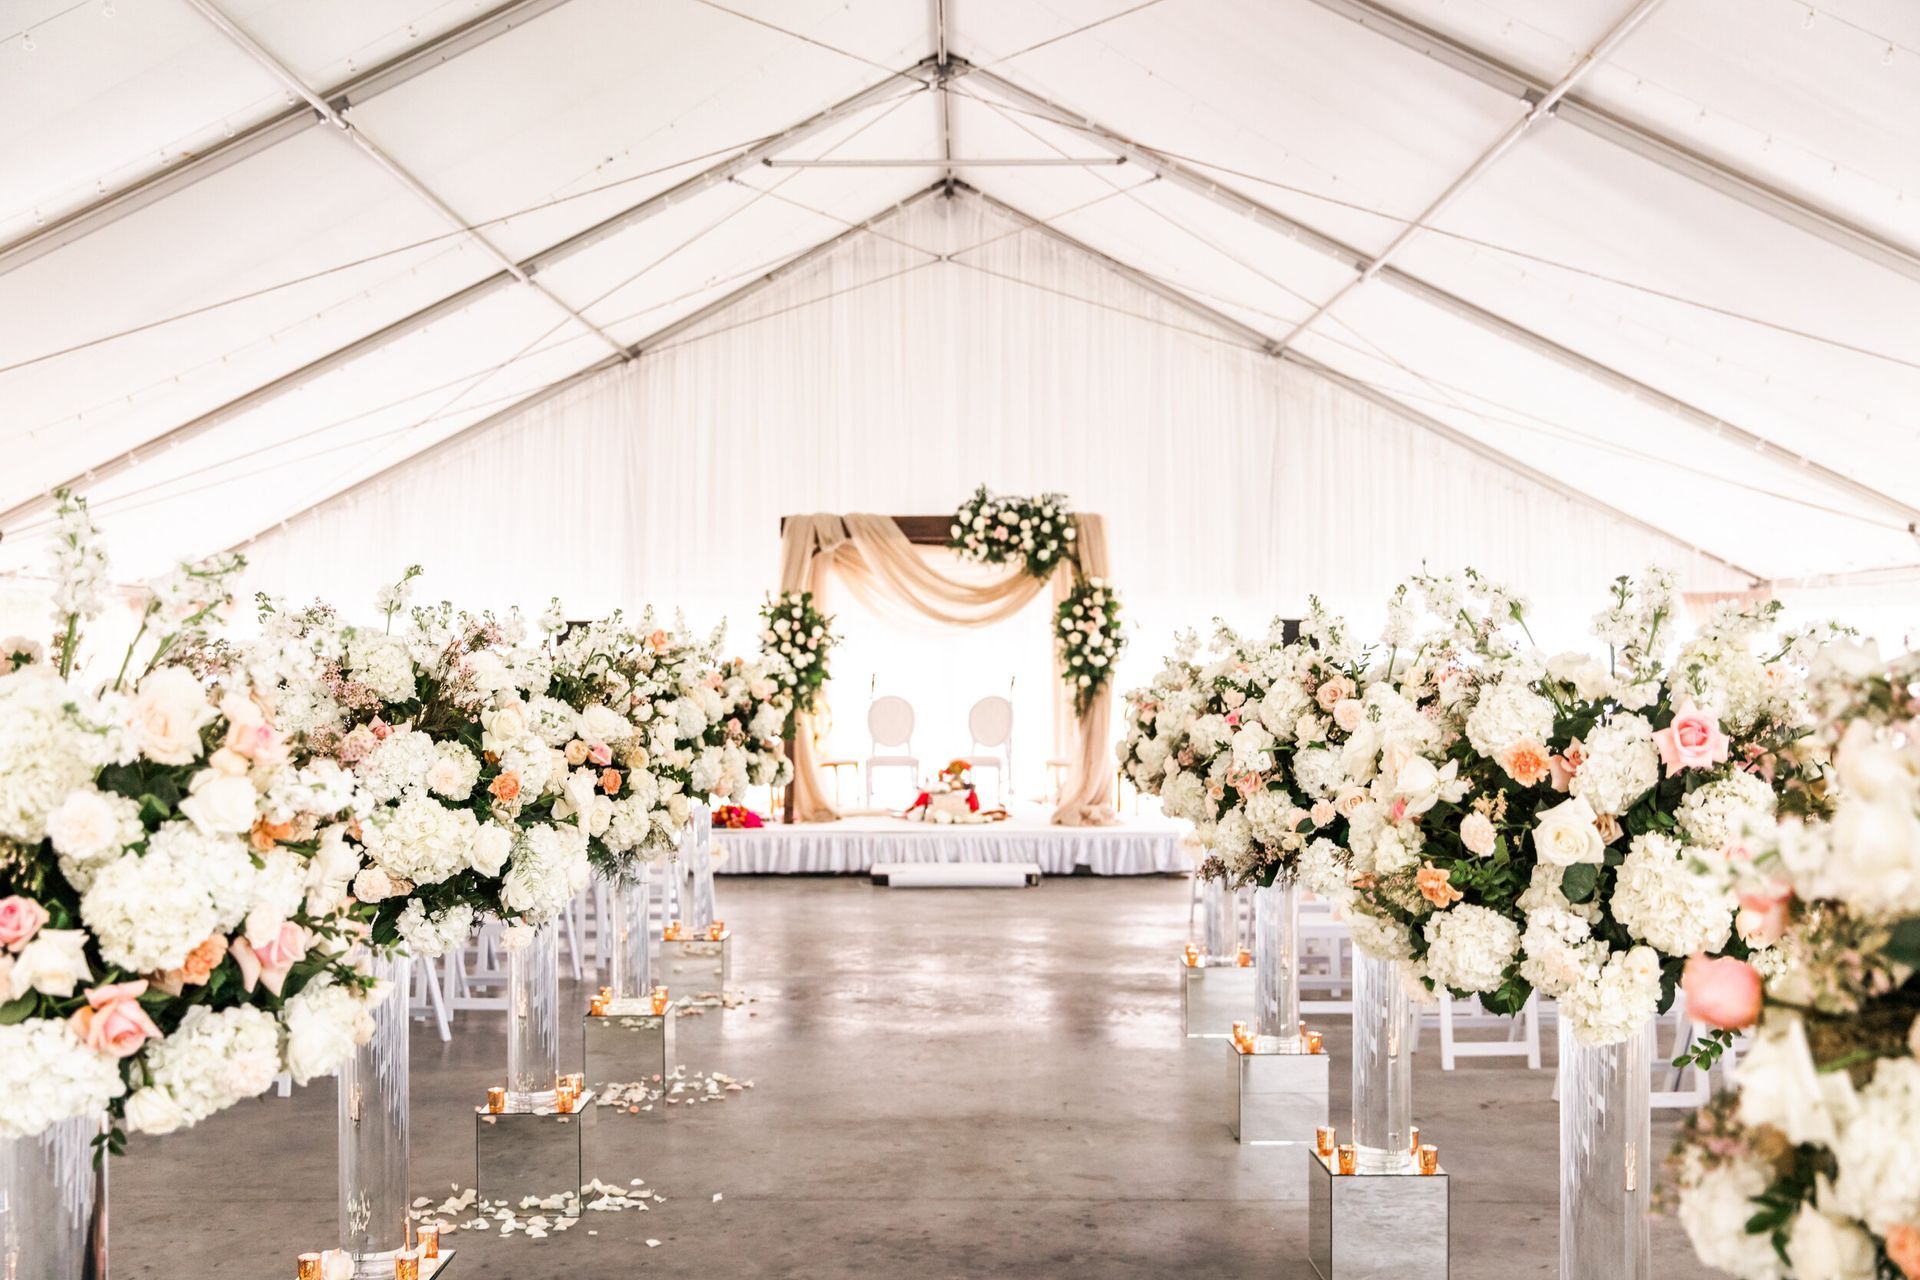 Neena and Sourav’s Wedding ceremony is taking place under a tent decorated with white flowers by Wedding Planner Nashville